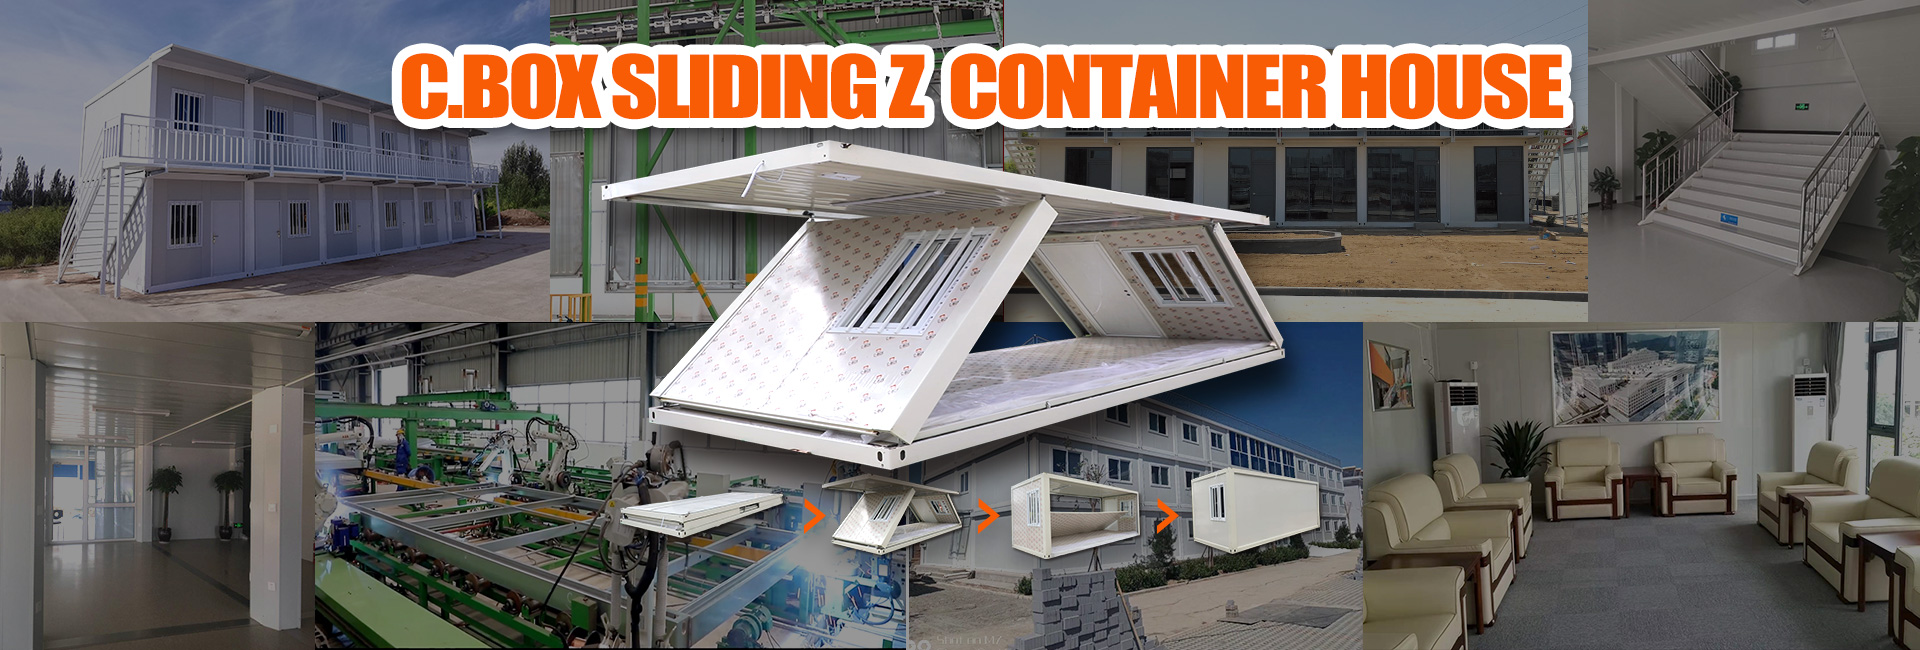 CBOX Sliding Z Container House